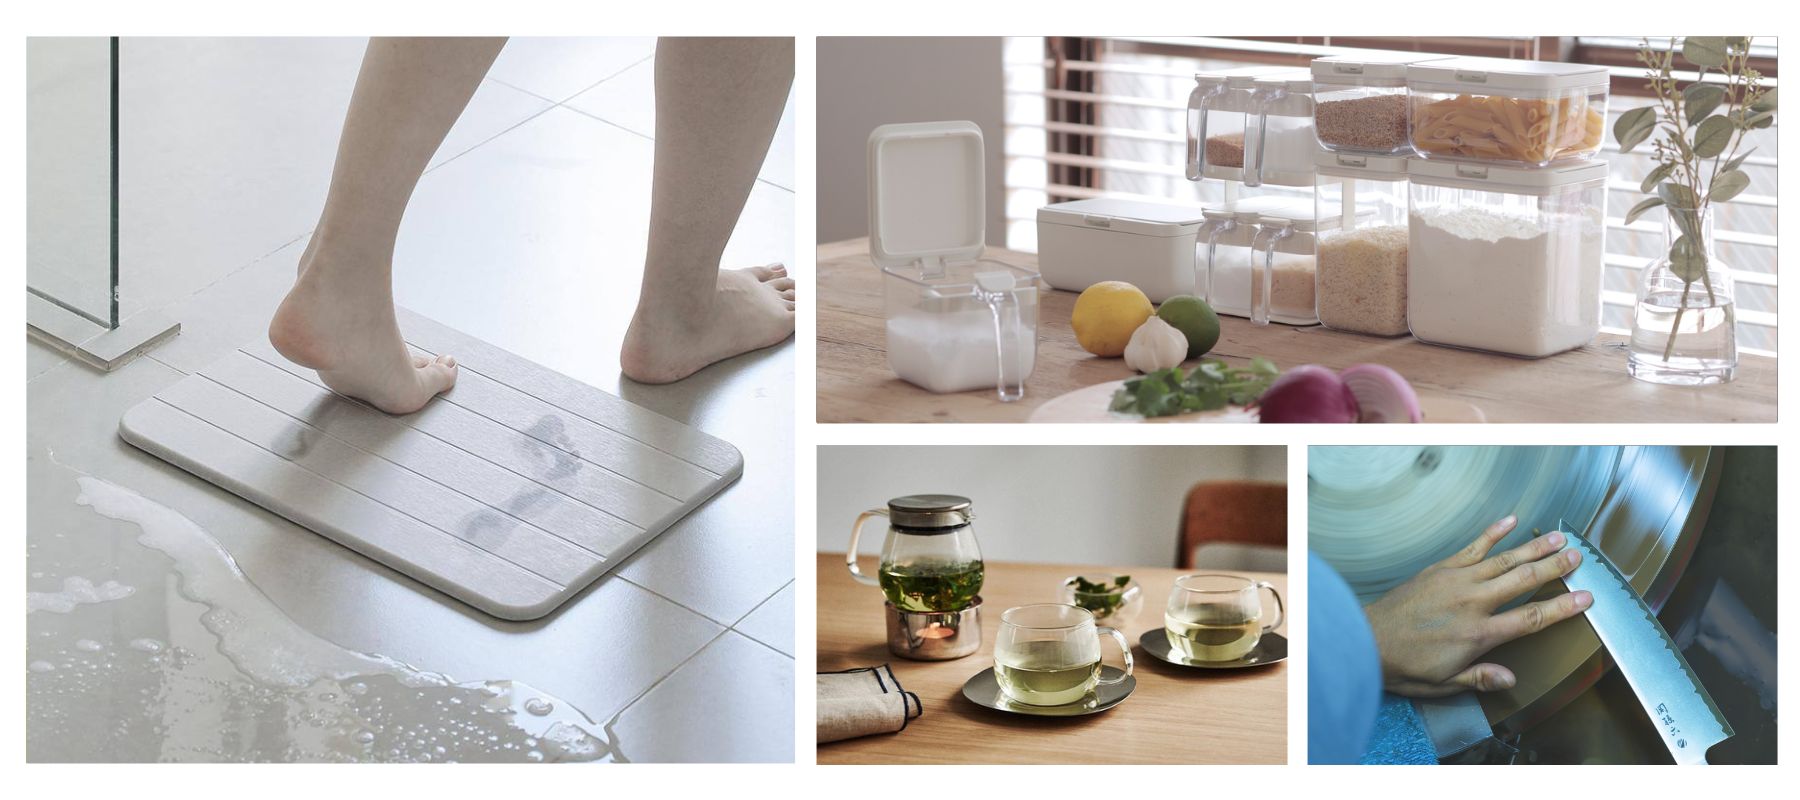 Collation of Japanese homeware products